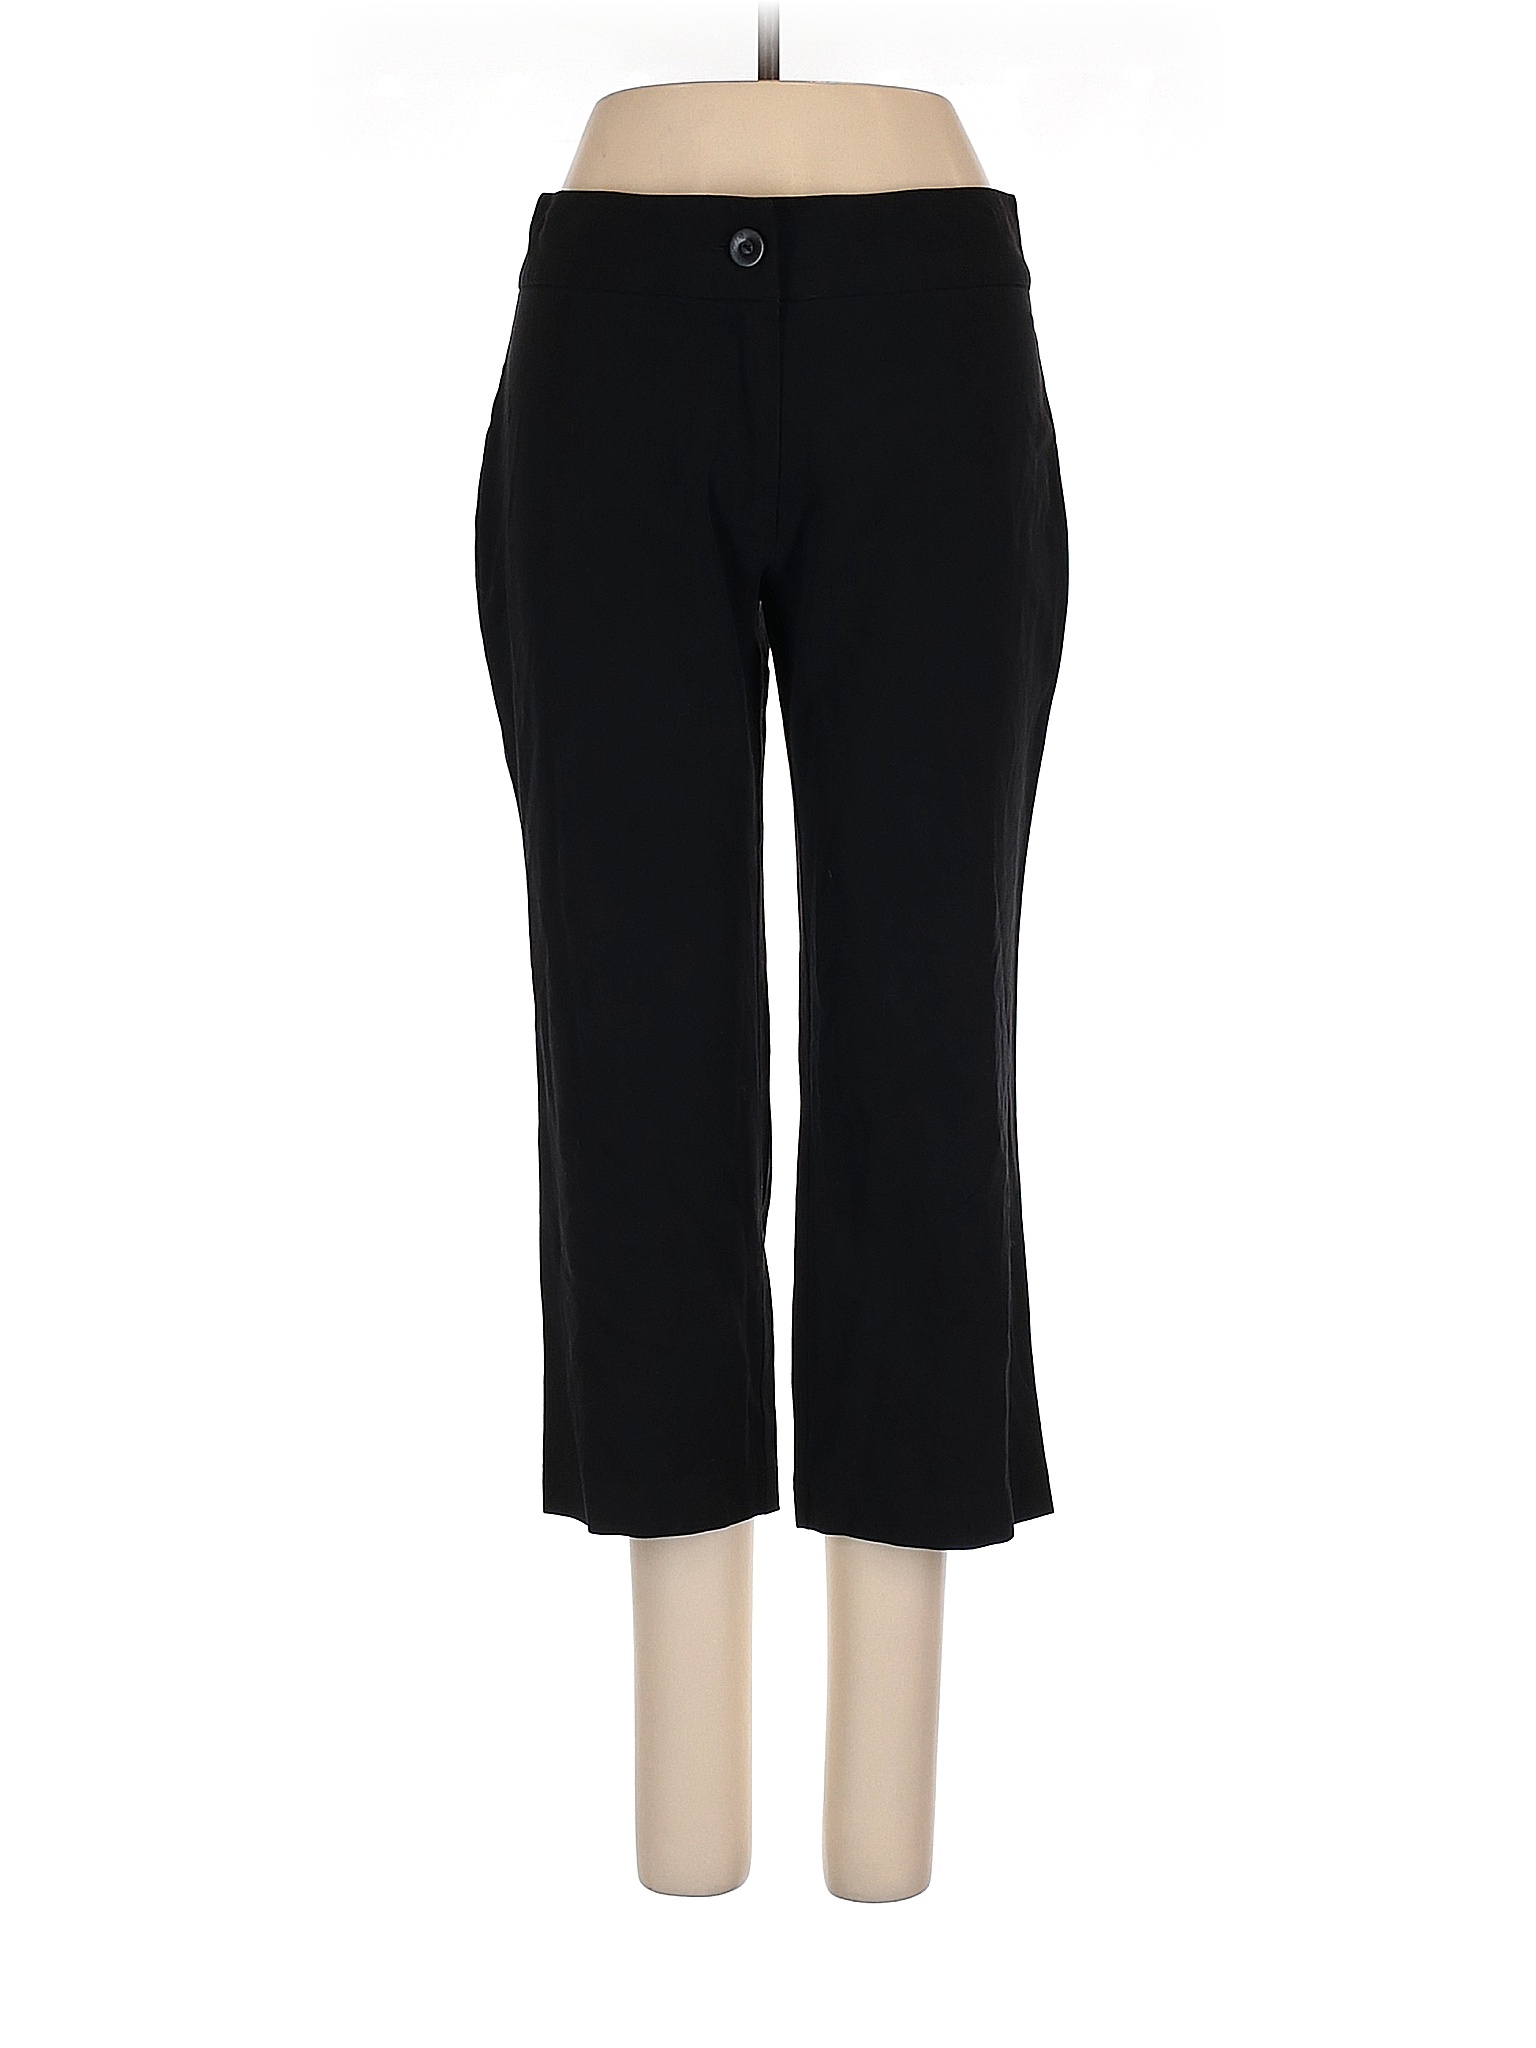 Frederick's of Hollywood Women's Pants On Sale Up To 90% Off Retail